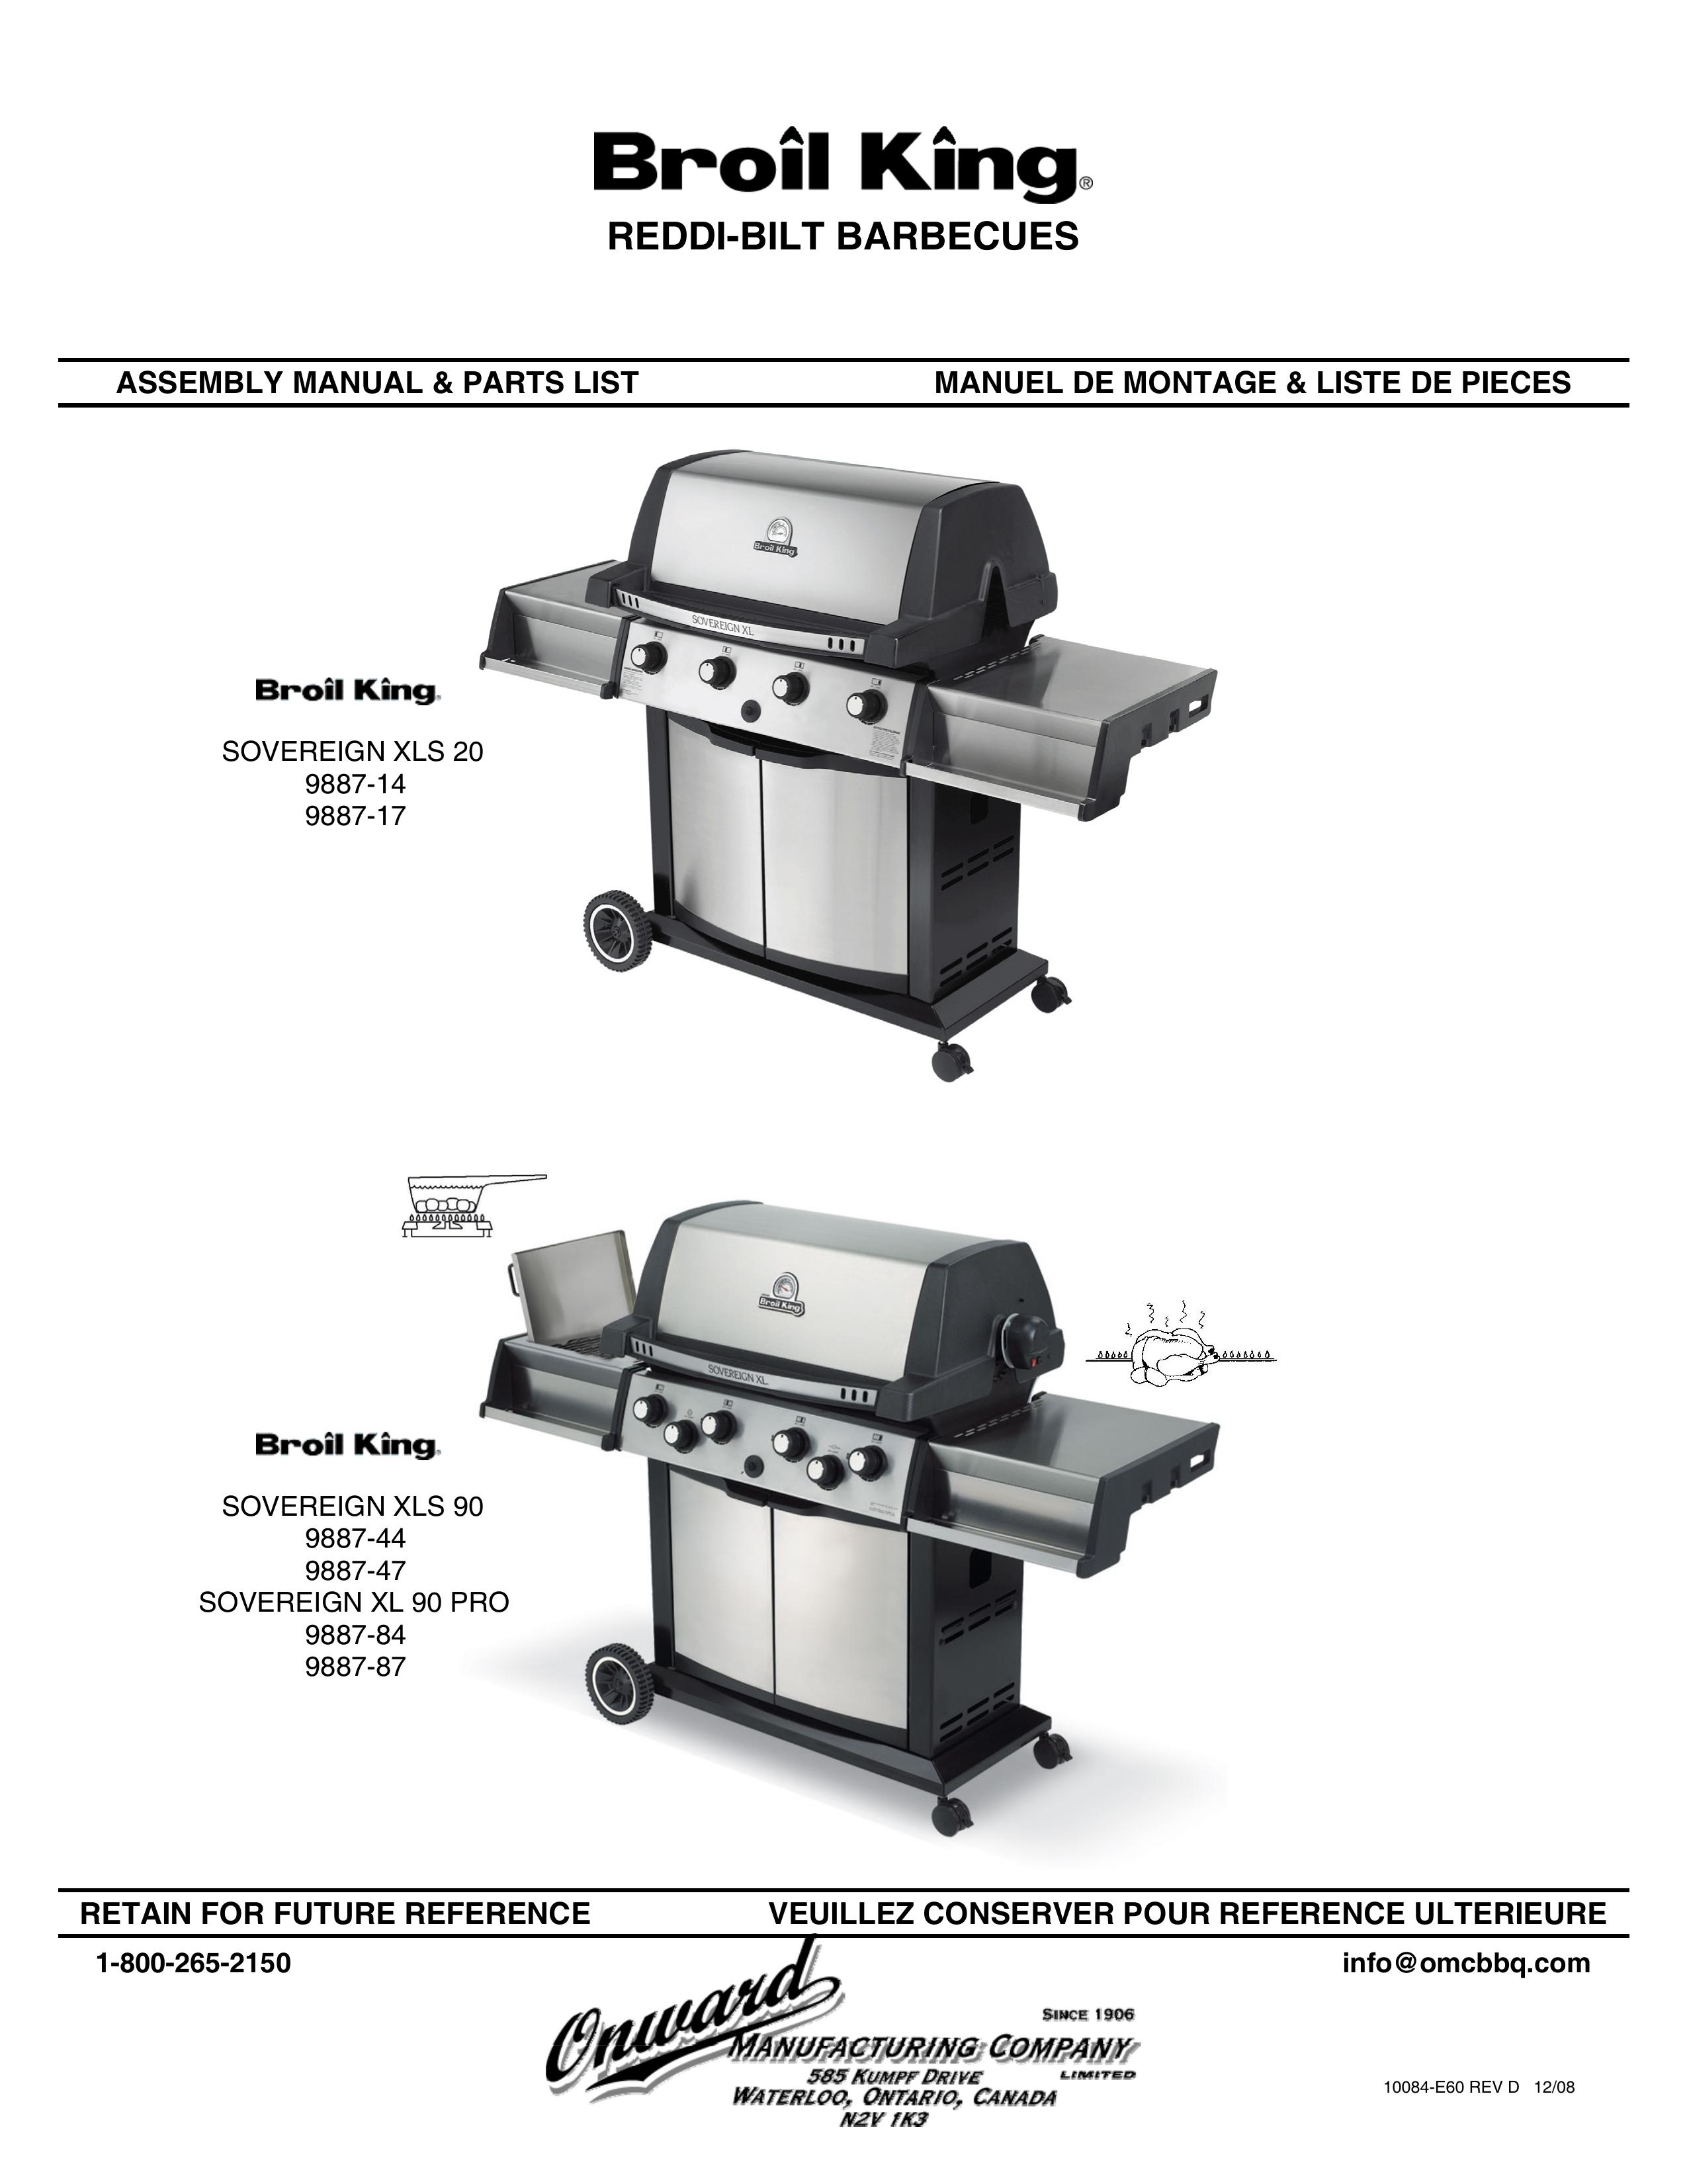 Broil King 9887-44 Electric Grill User Manual